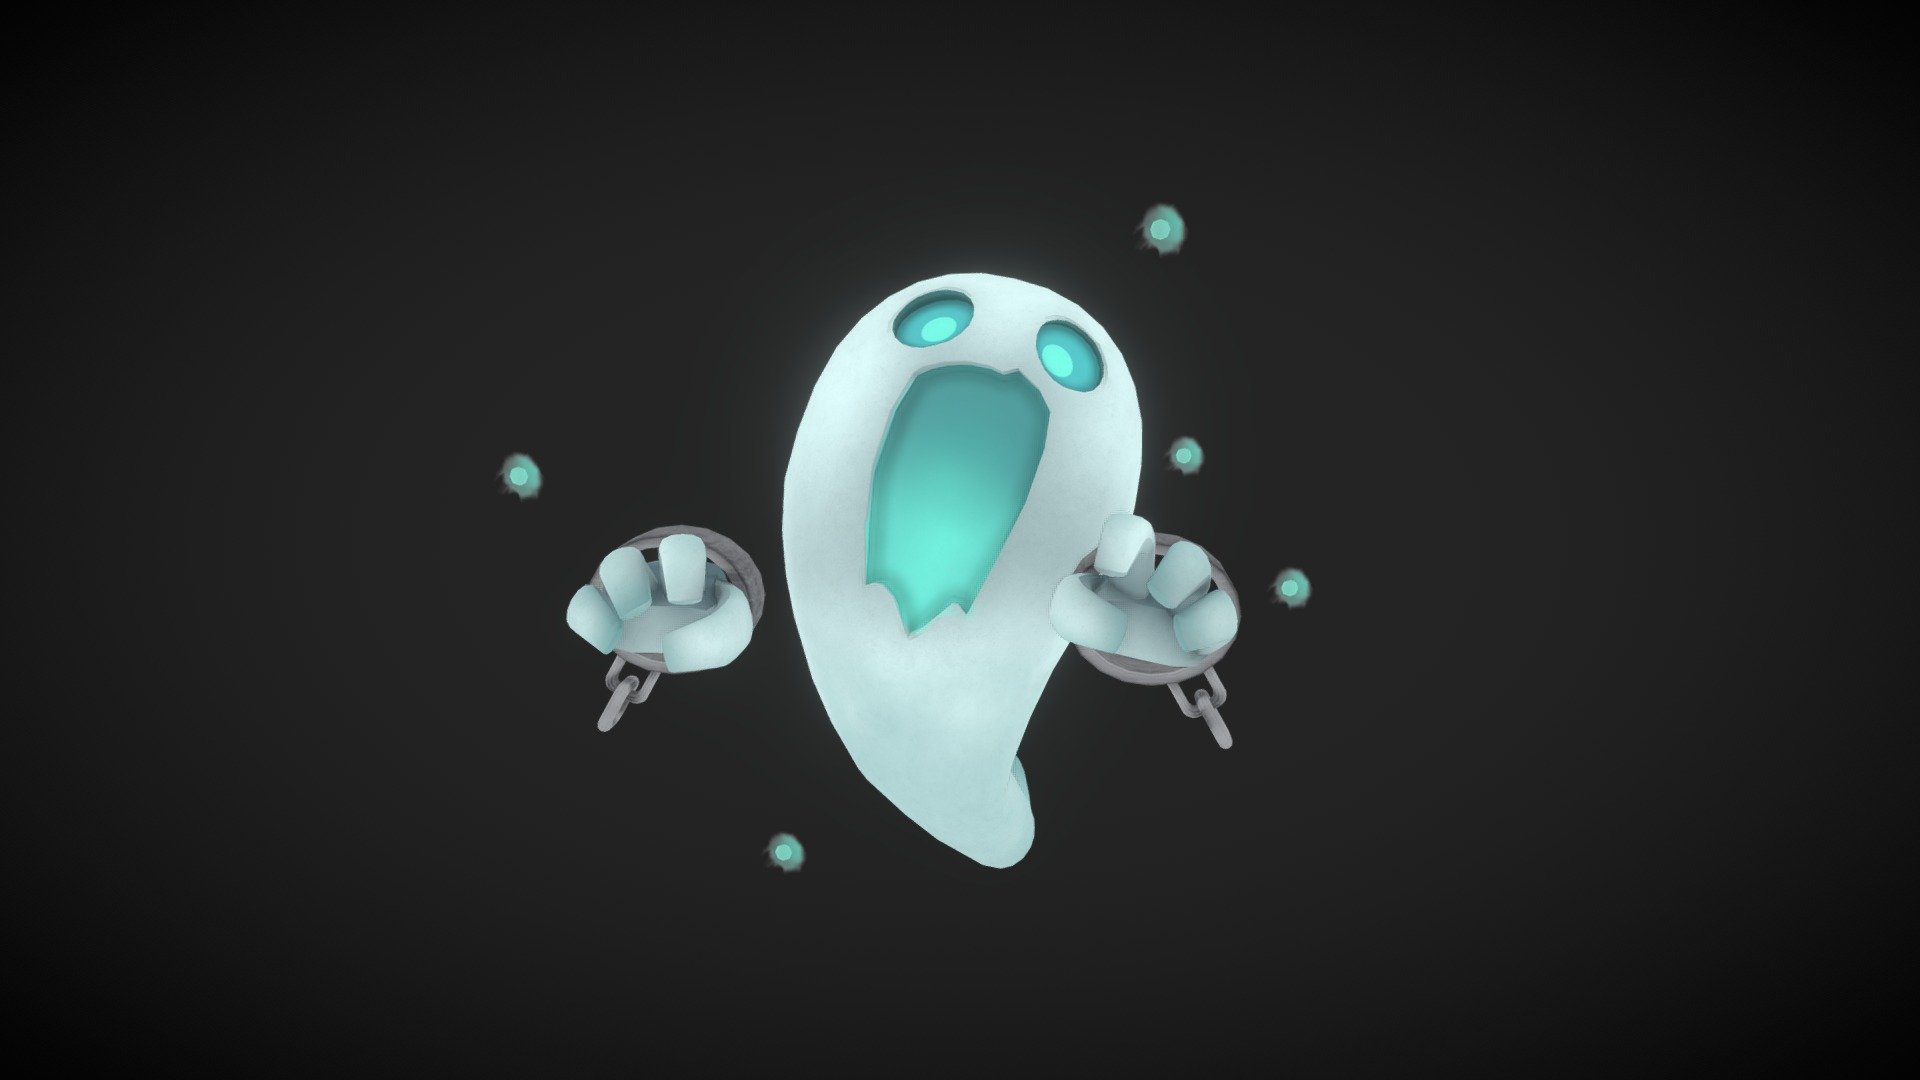 16th day of 3december
This time i tried making a ghost!. 
should had been for october, but see it as the ghost of past christmas :p - 3December -Fantasy Ghost - Download Free 3D model by warbossdil 3d model